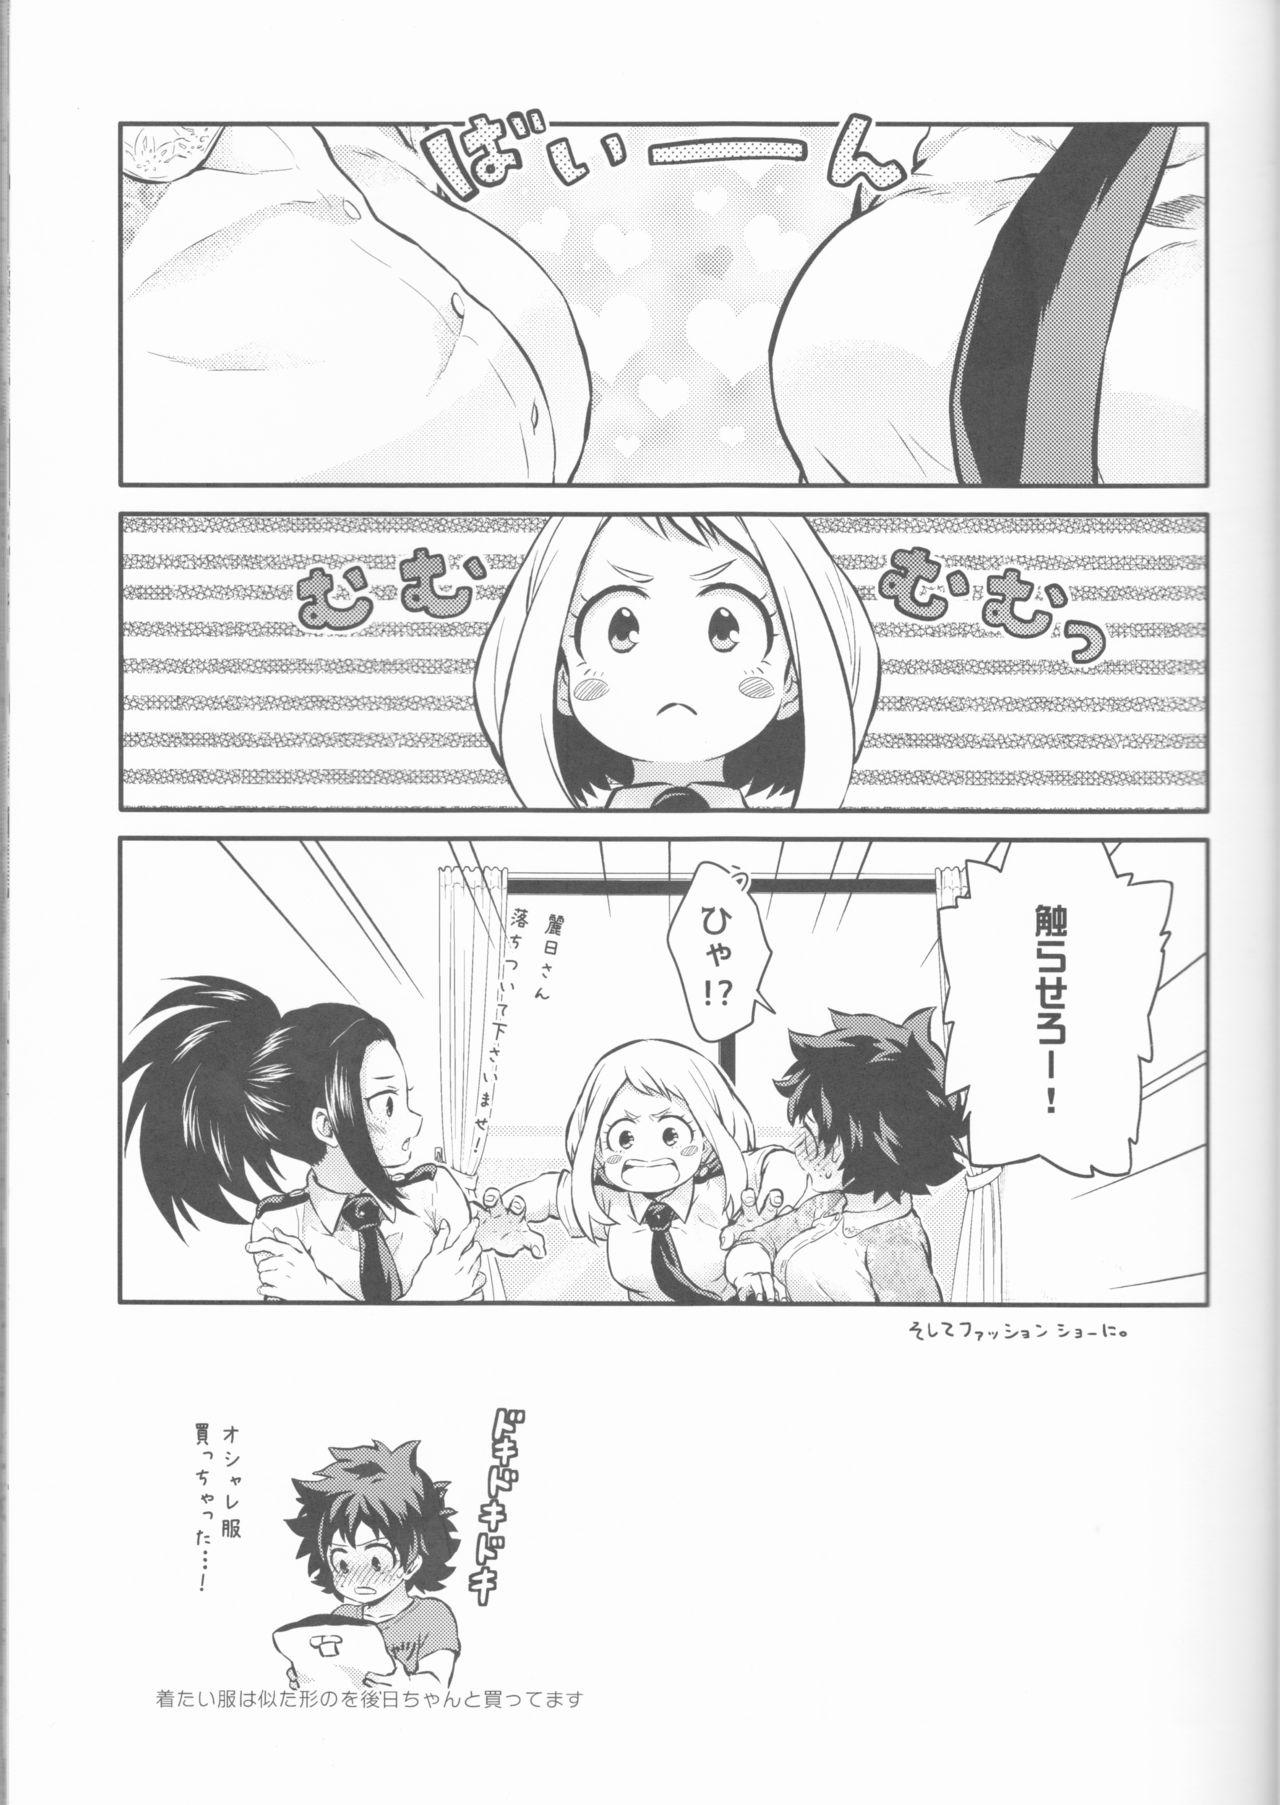 Thong Love Me Tender another story - My hero academia Prostitute - Page 7